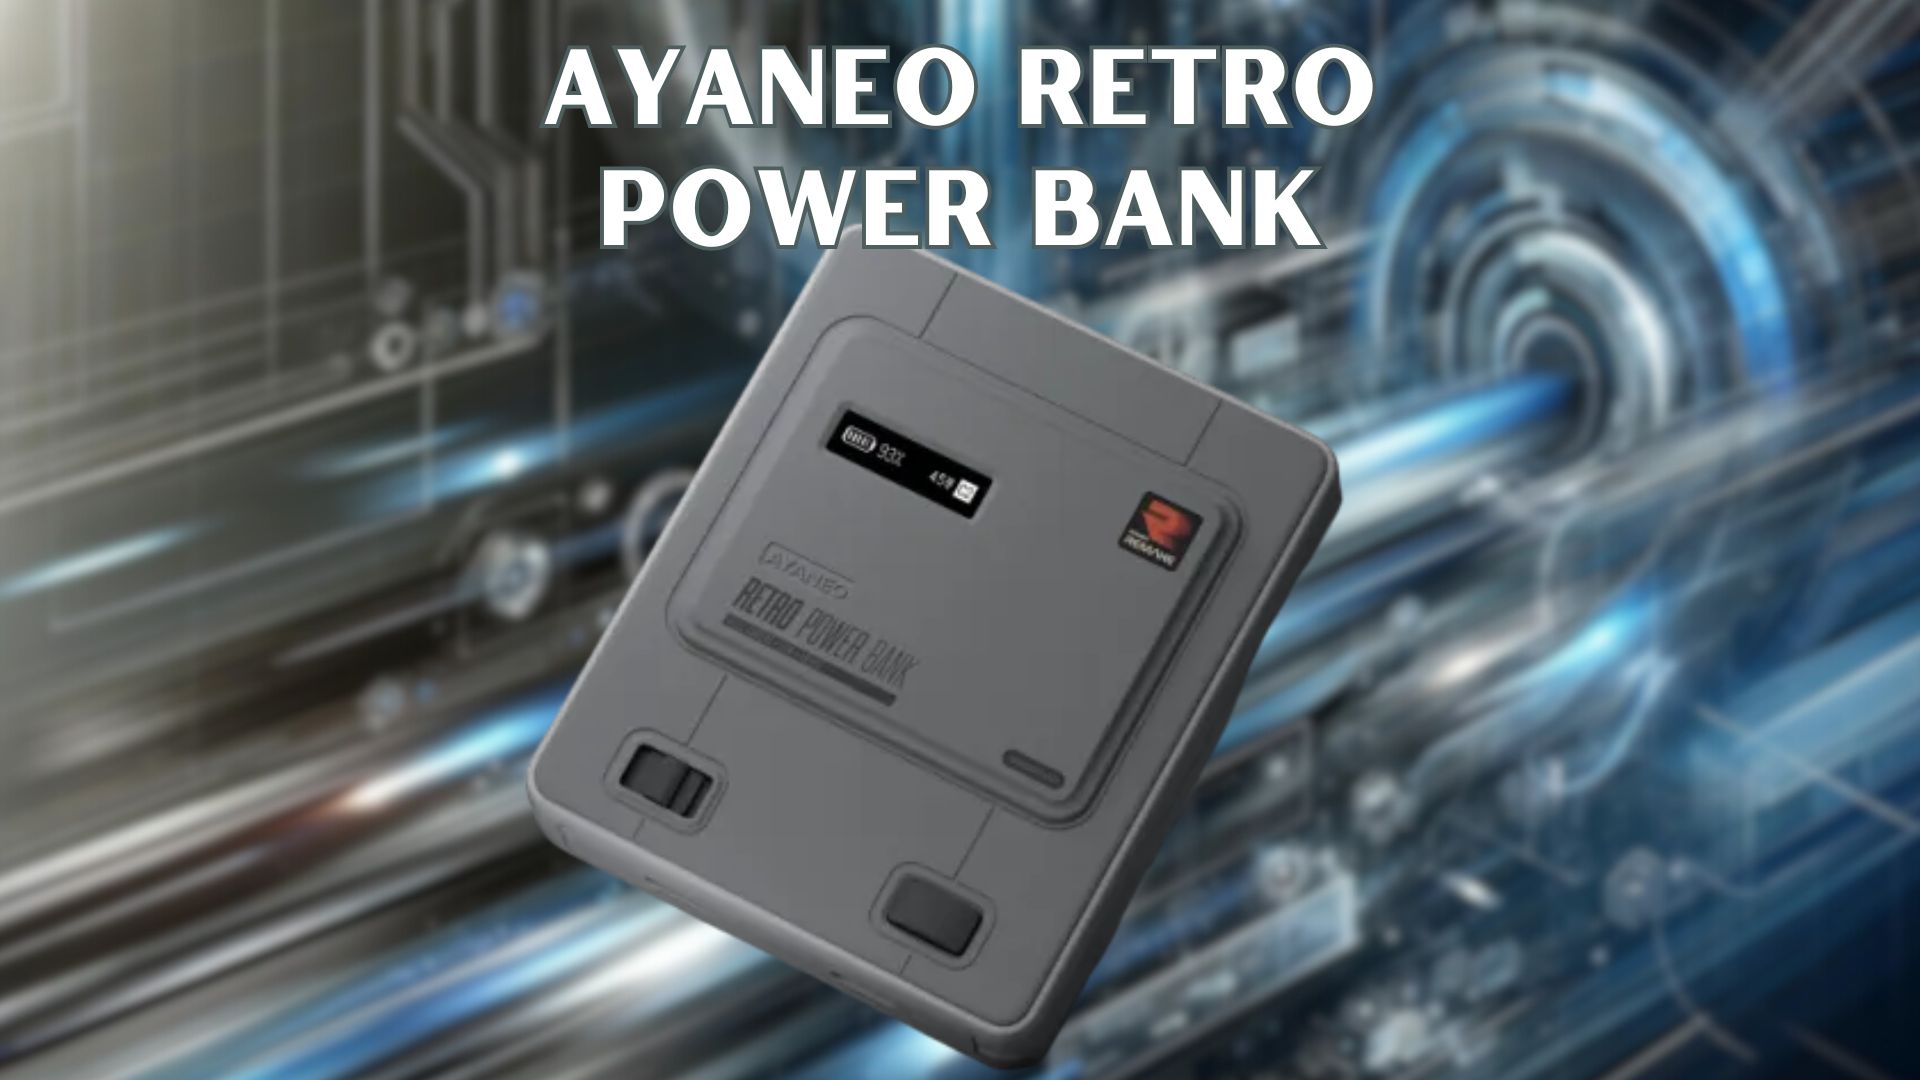 AYANEO Retro Power Bank – Classic console inspired power bank